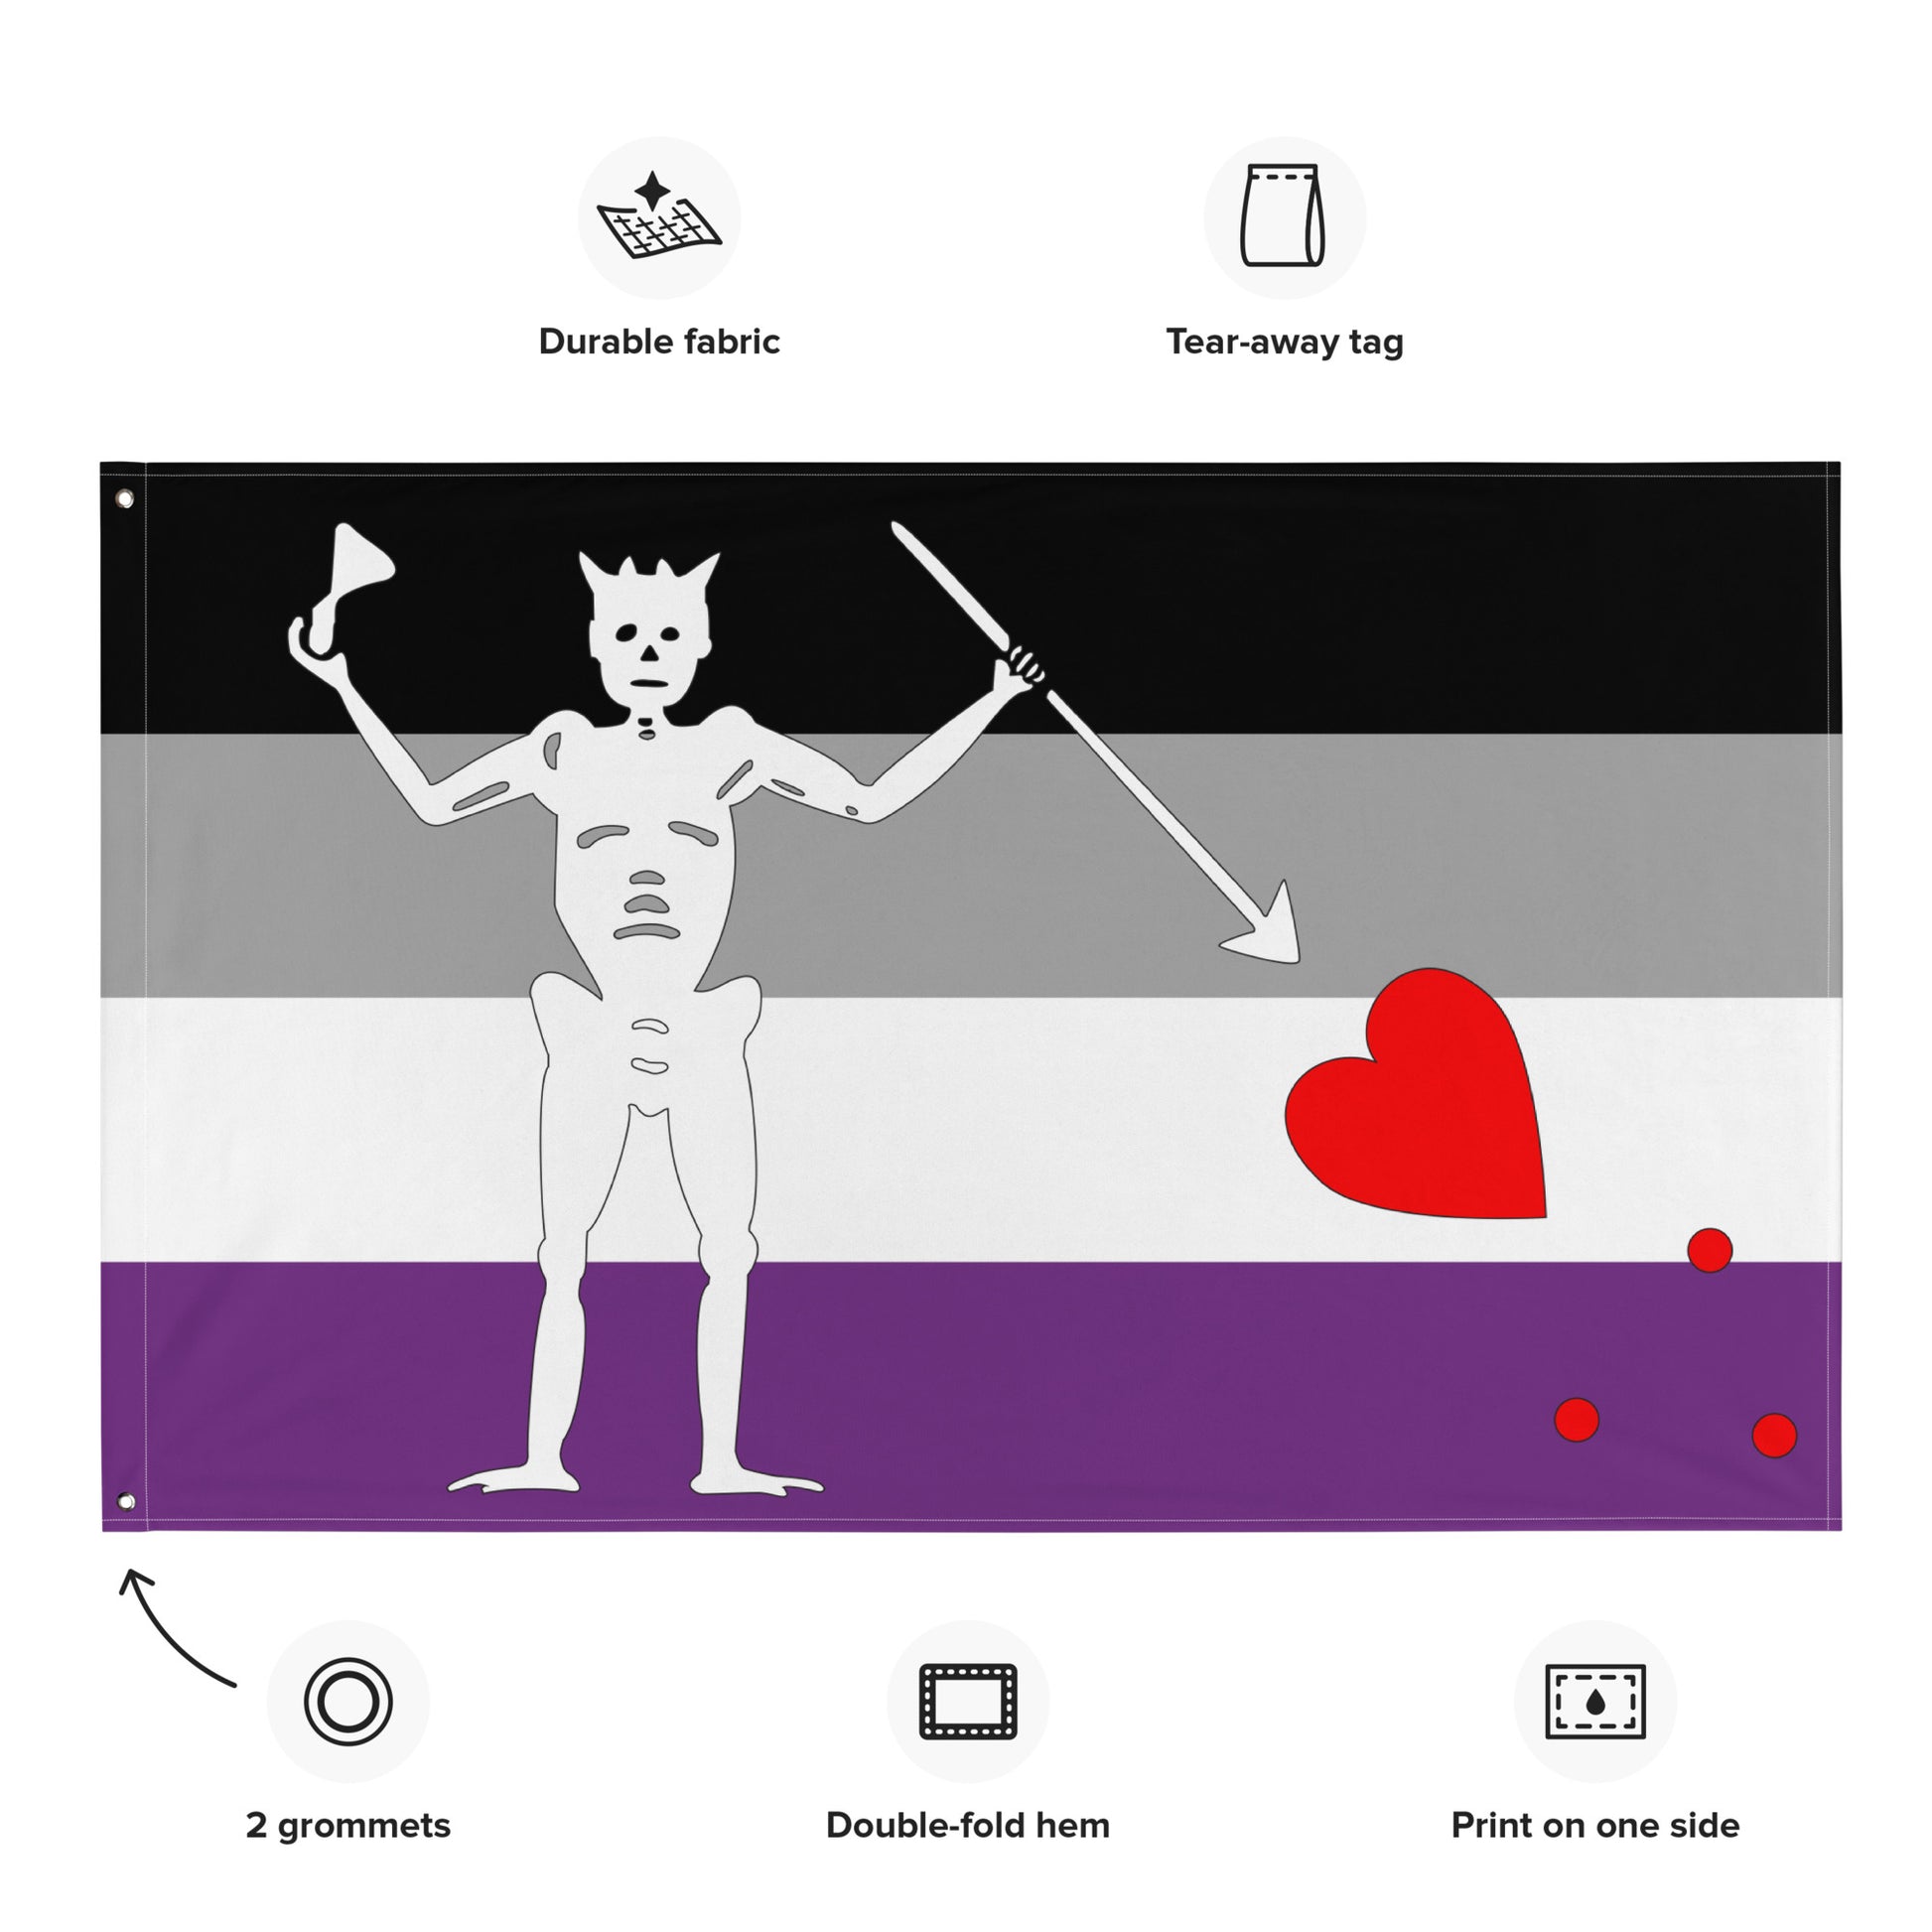 the asexual flag with blackbeard's symbol surrounded by the specifications of "durable fabric, tear-away tag, 2 grommets, double-fold hem, print on one side"